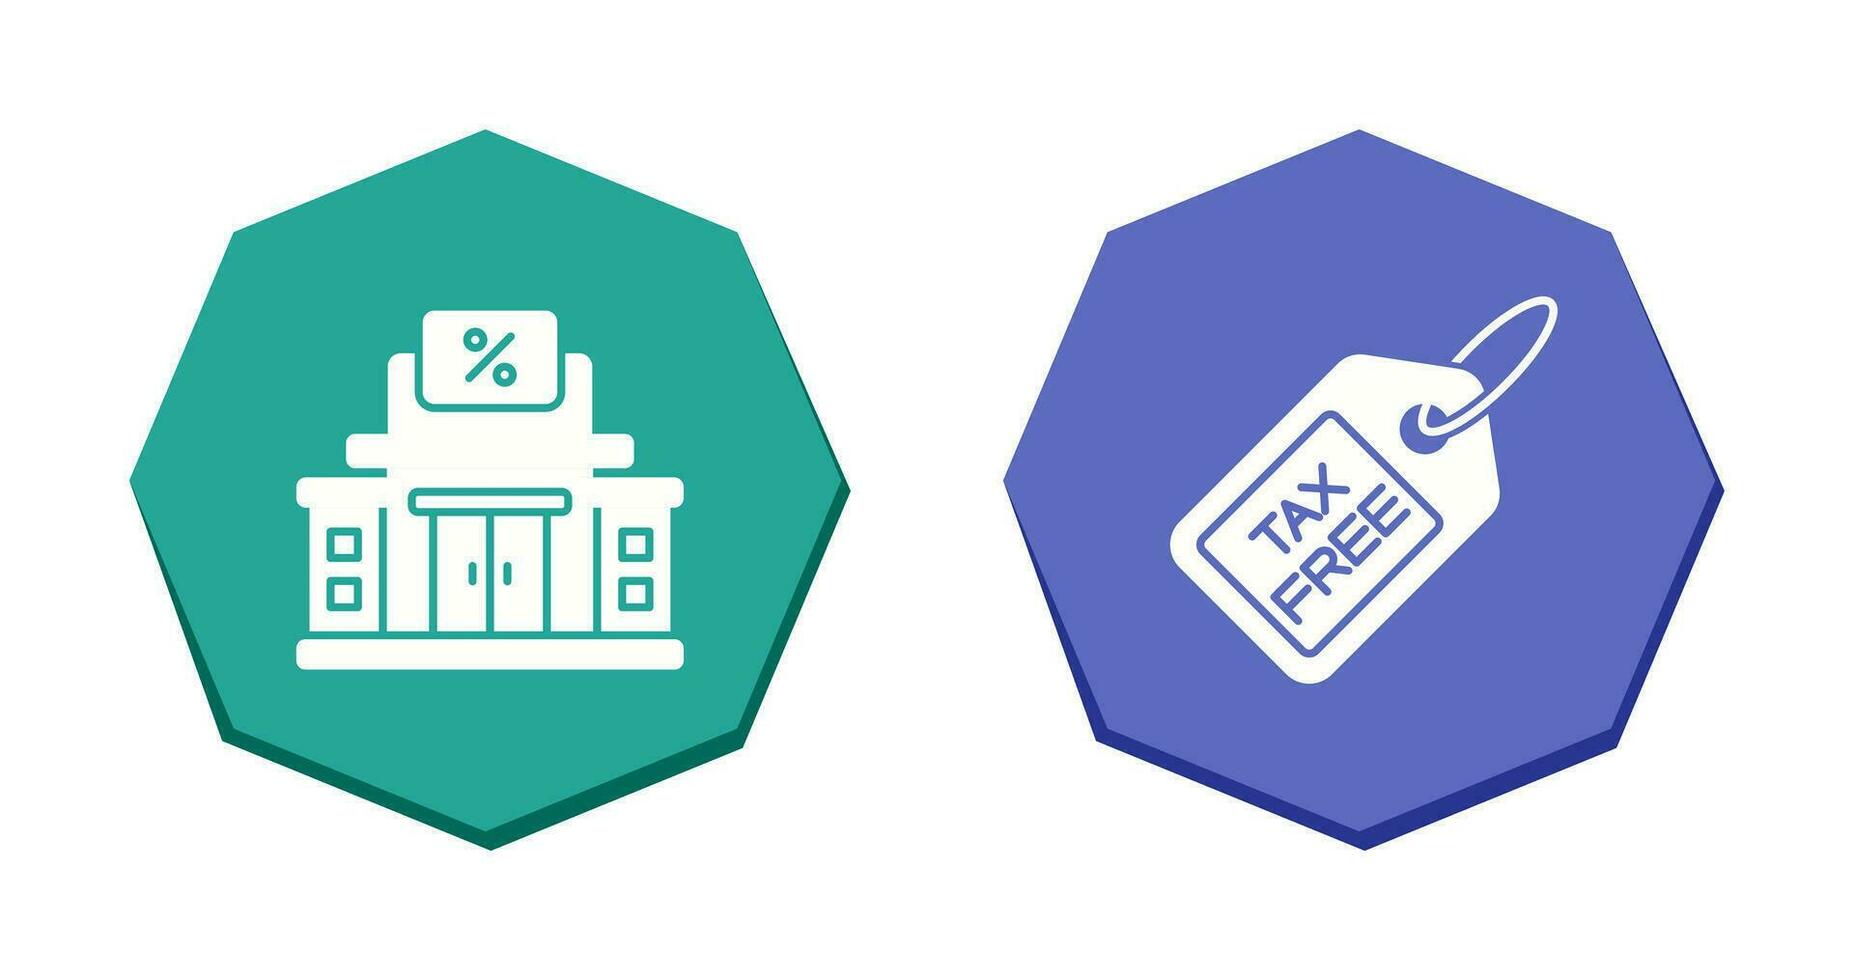 Tax Office and Tax Icon vector